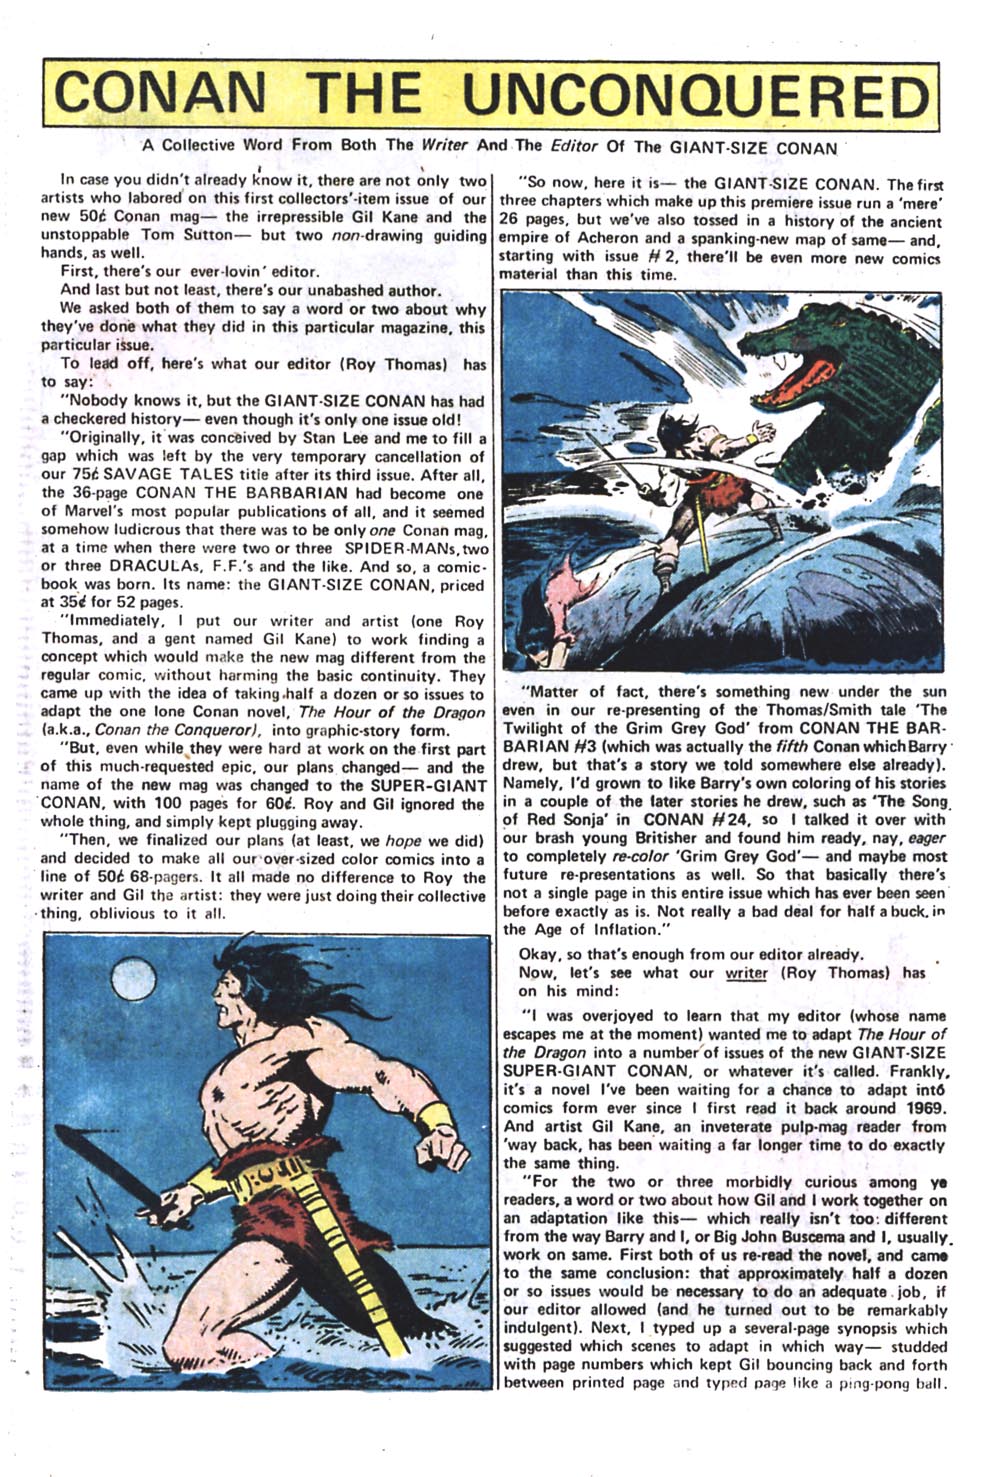 Read online Giant-Size Conan comic -  Issue #1 - 32